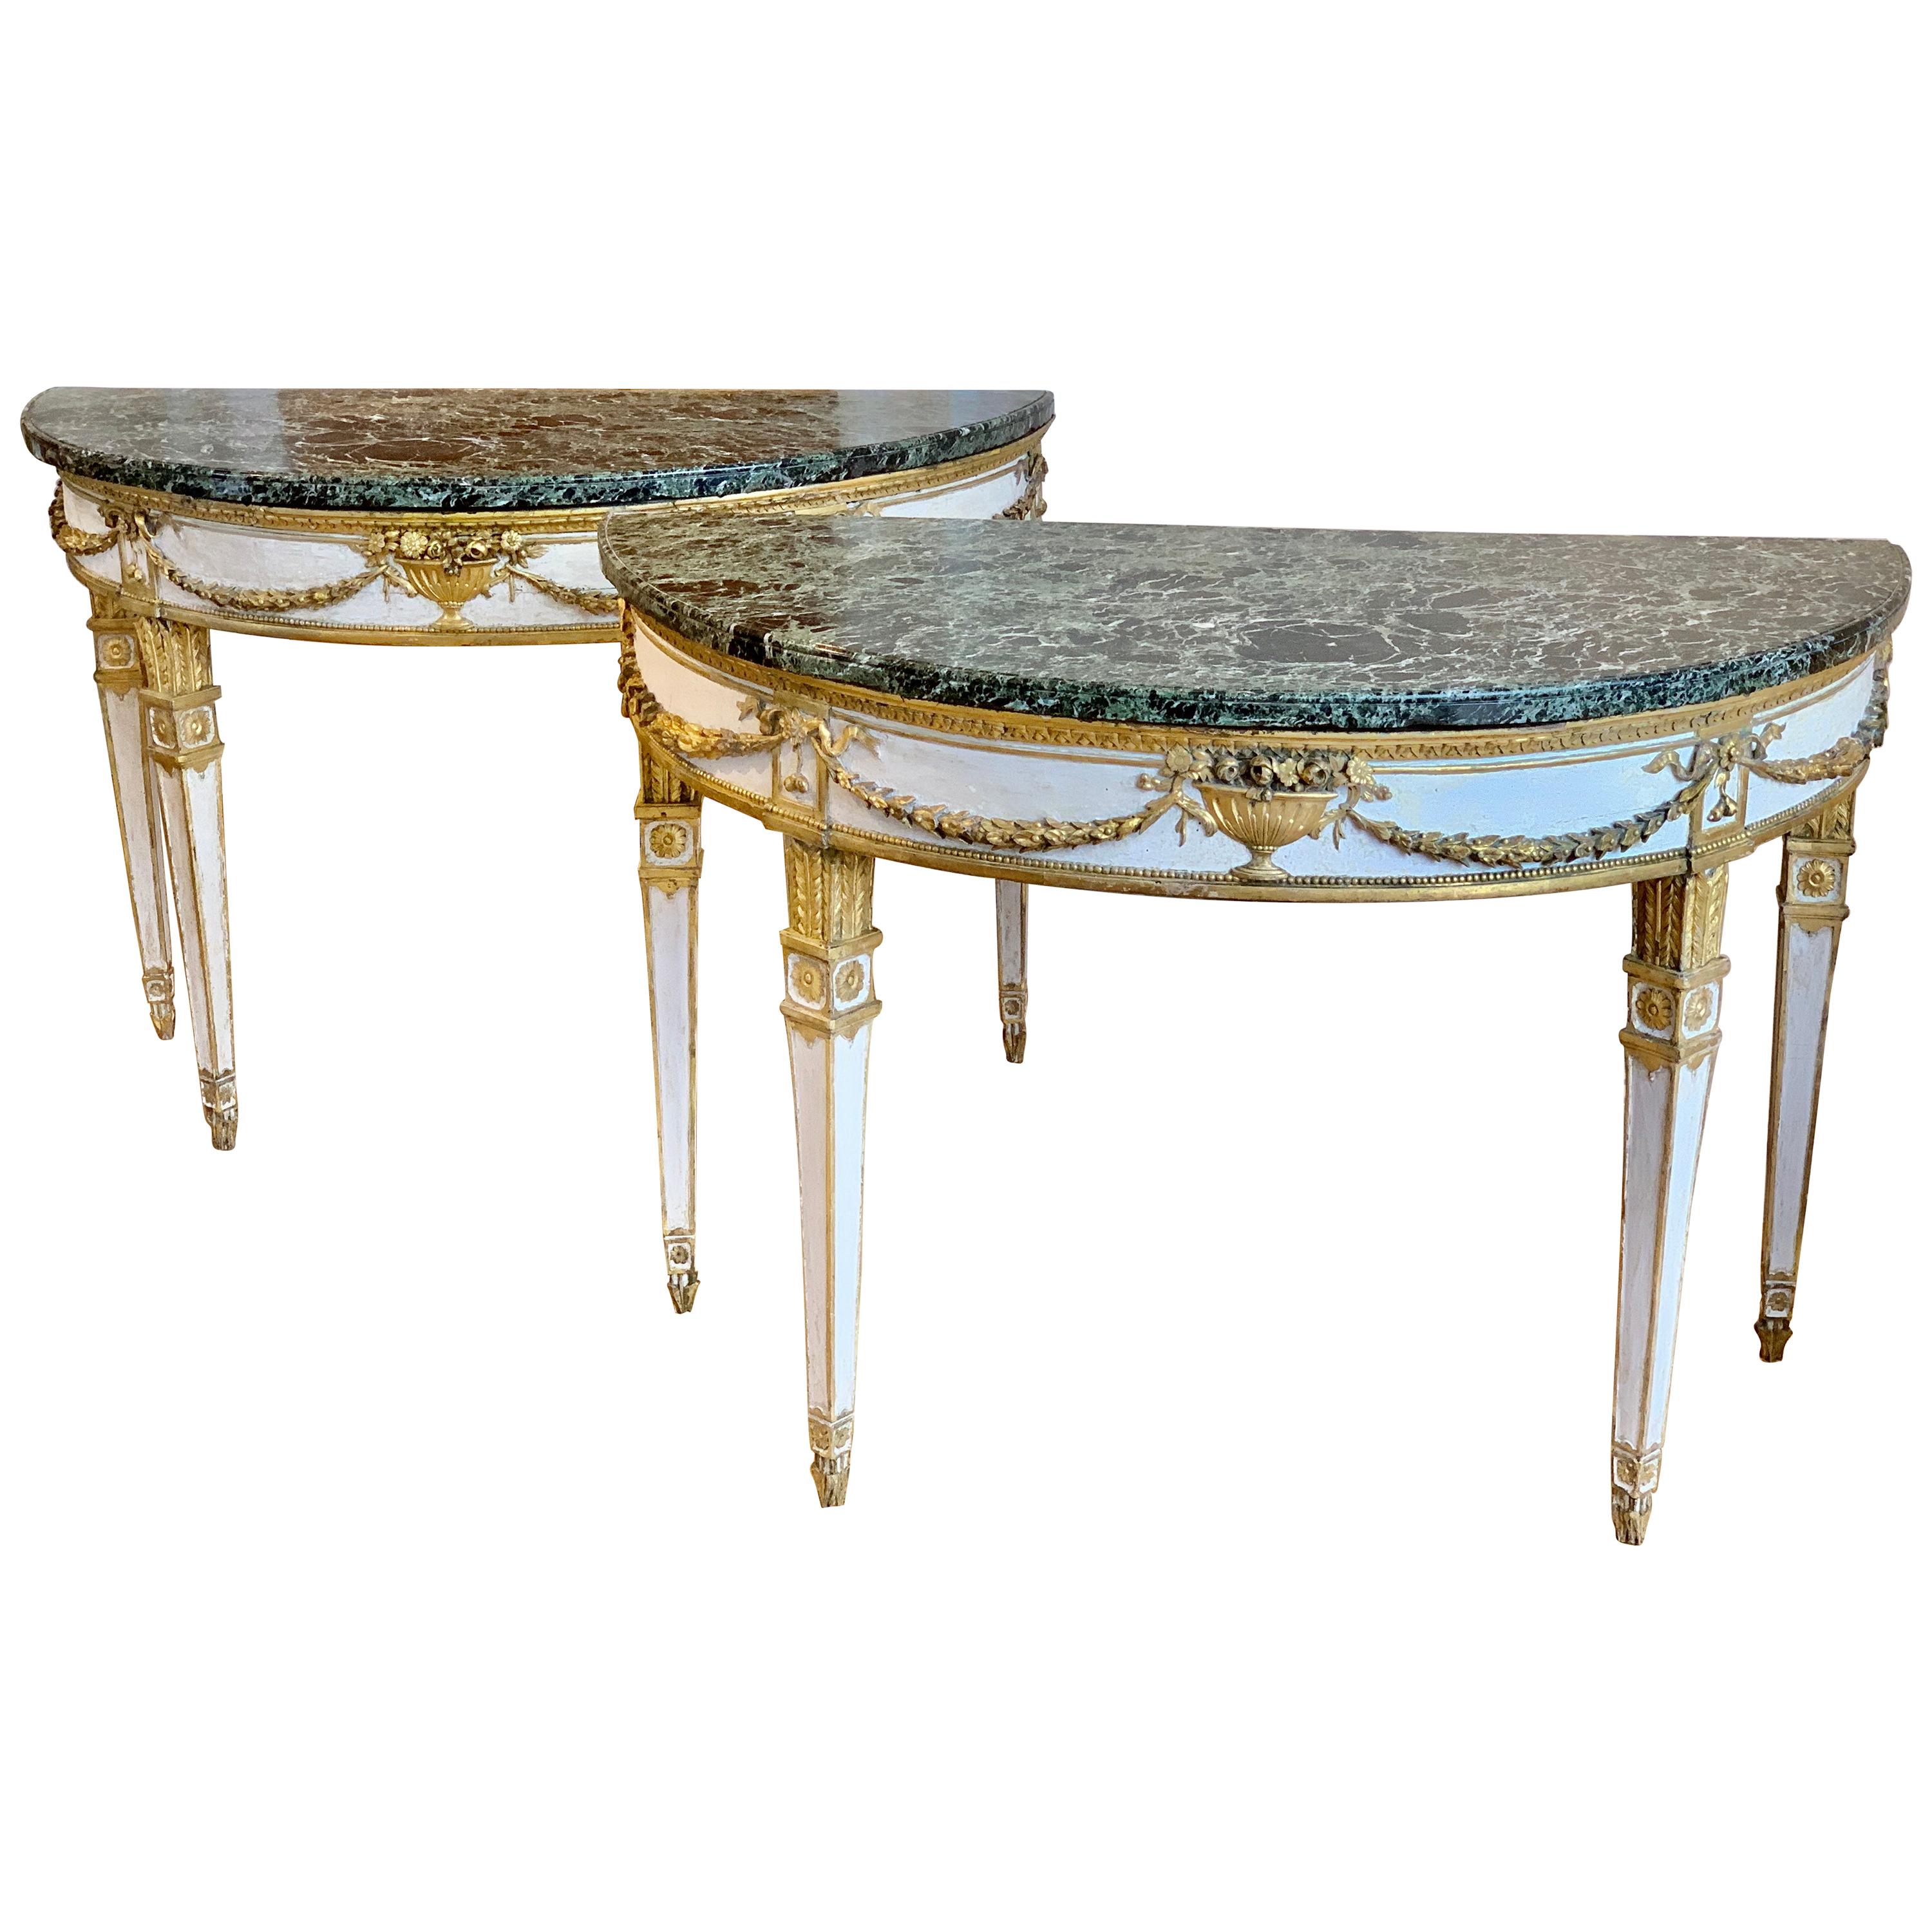 Pair of 18th Century Italian Neoclassical Demi-lune Console Tables